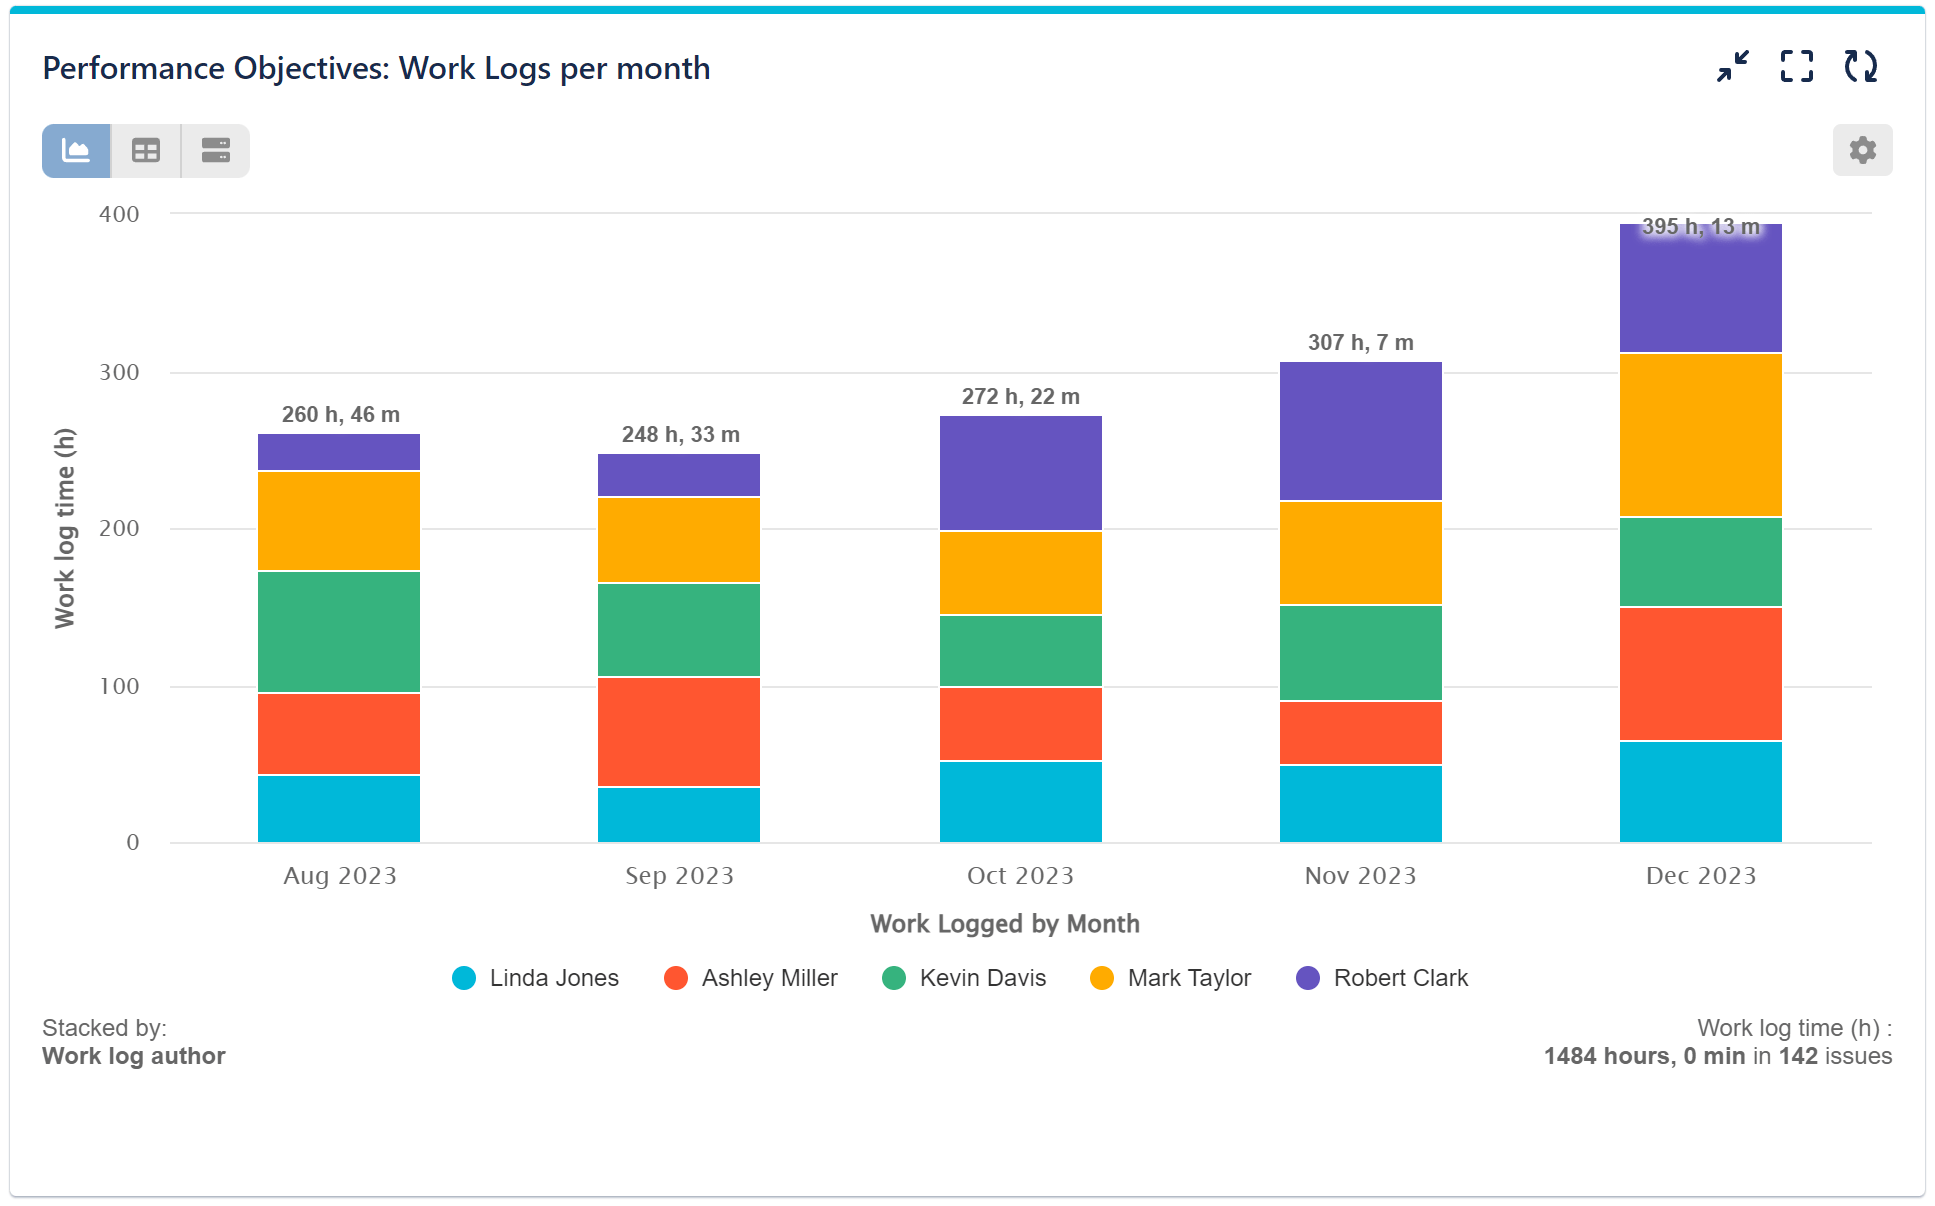 WorkLogged per Month Stacked Bar chart